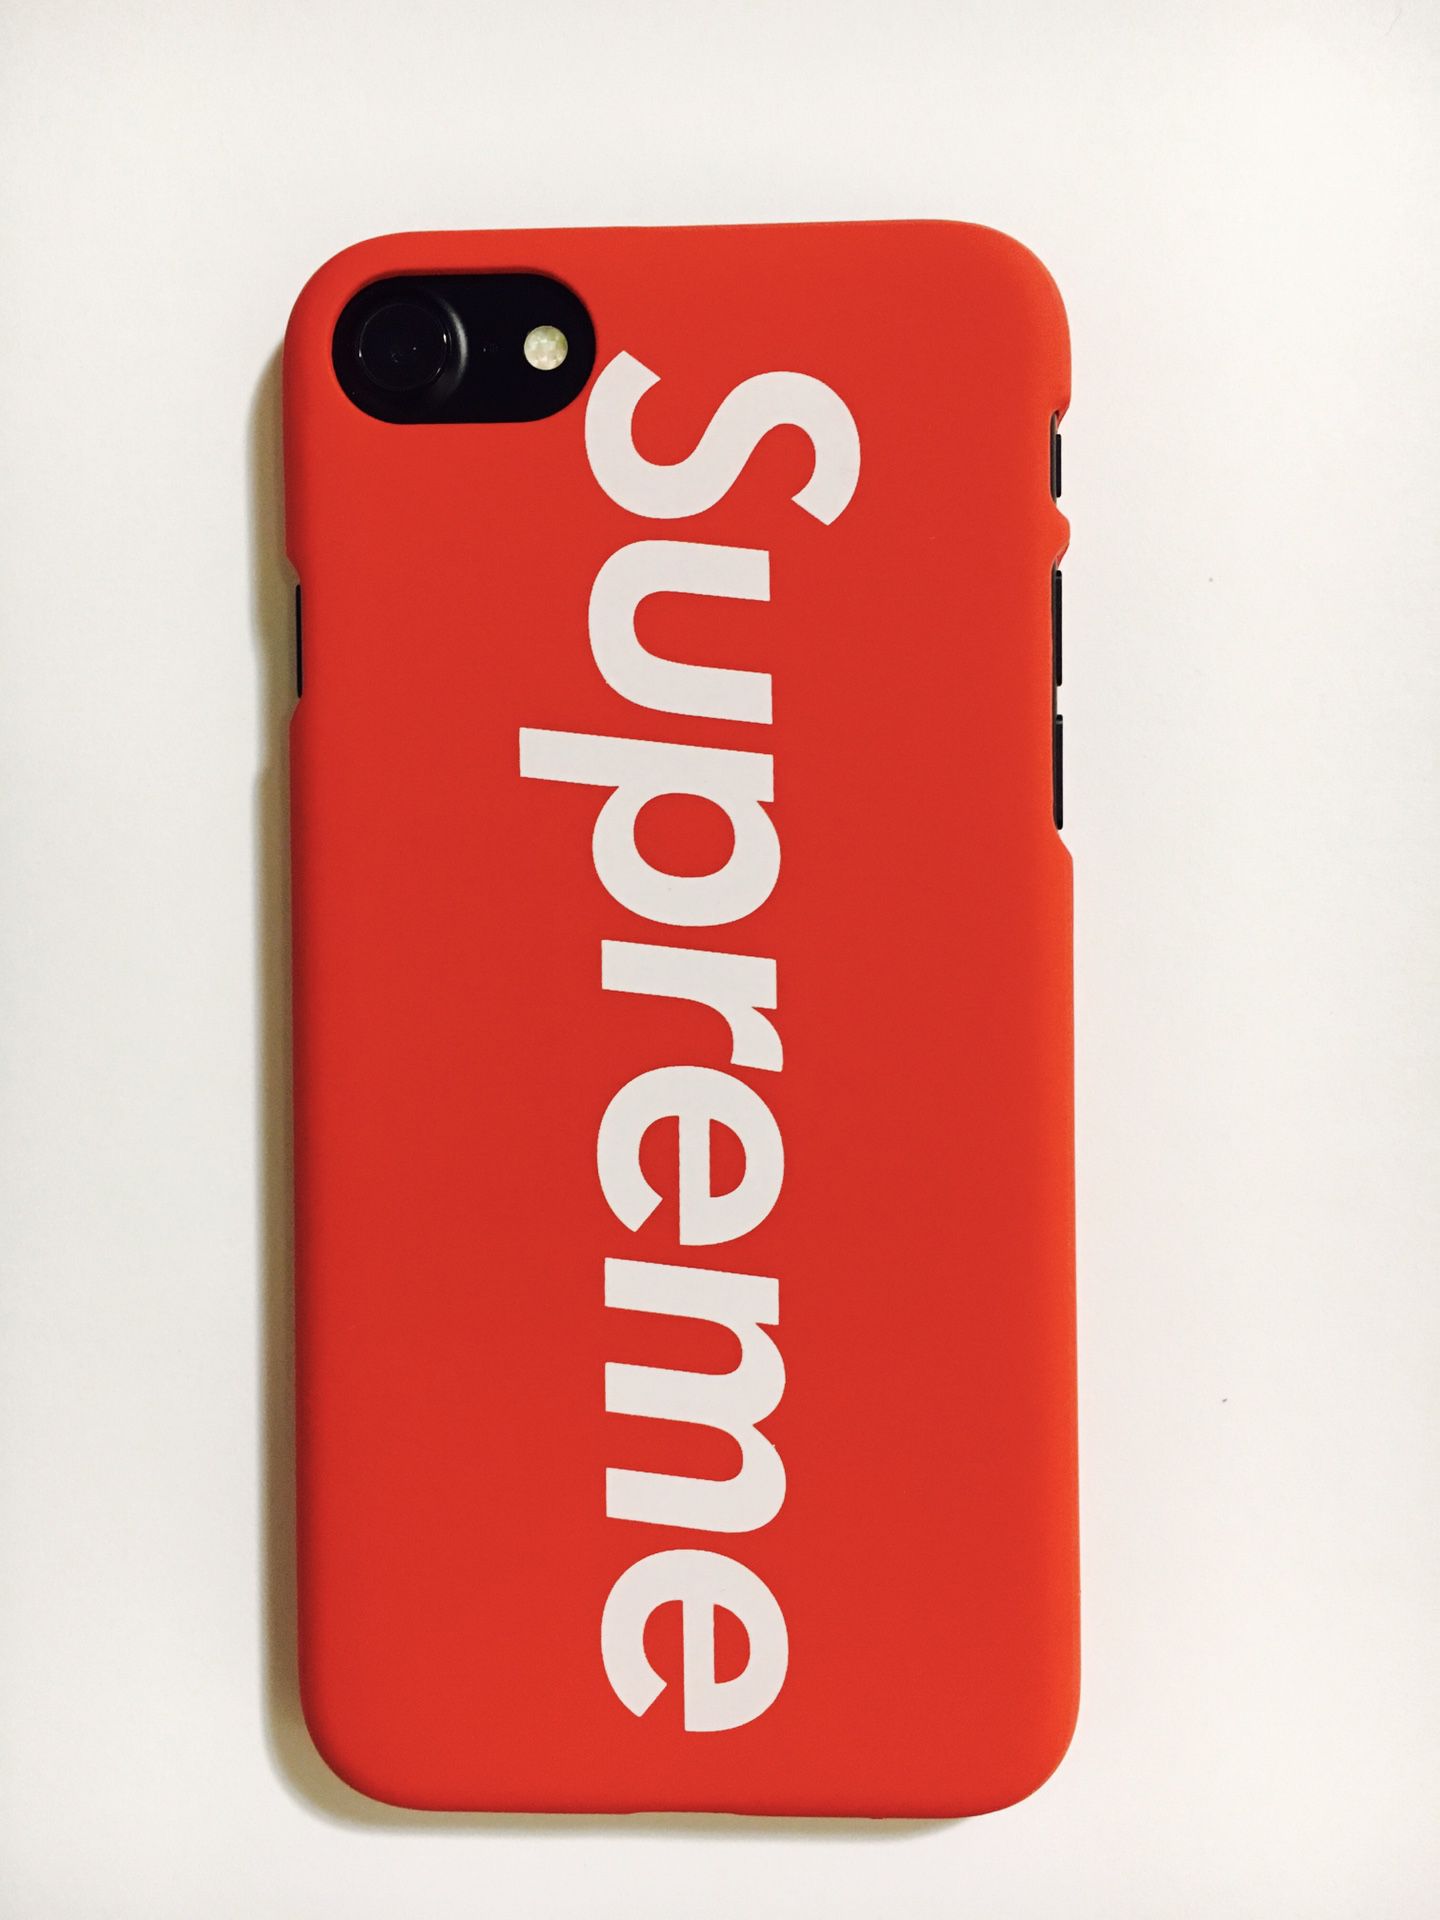 Gucci GG Supreme iPhone 6 Case - Neutrals Phone Cases, Technology